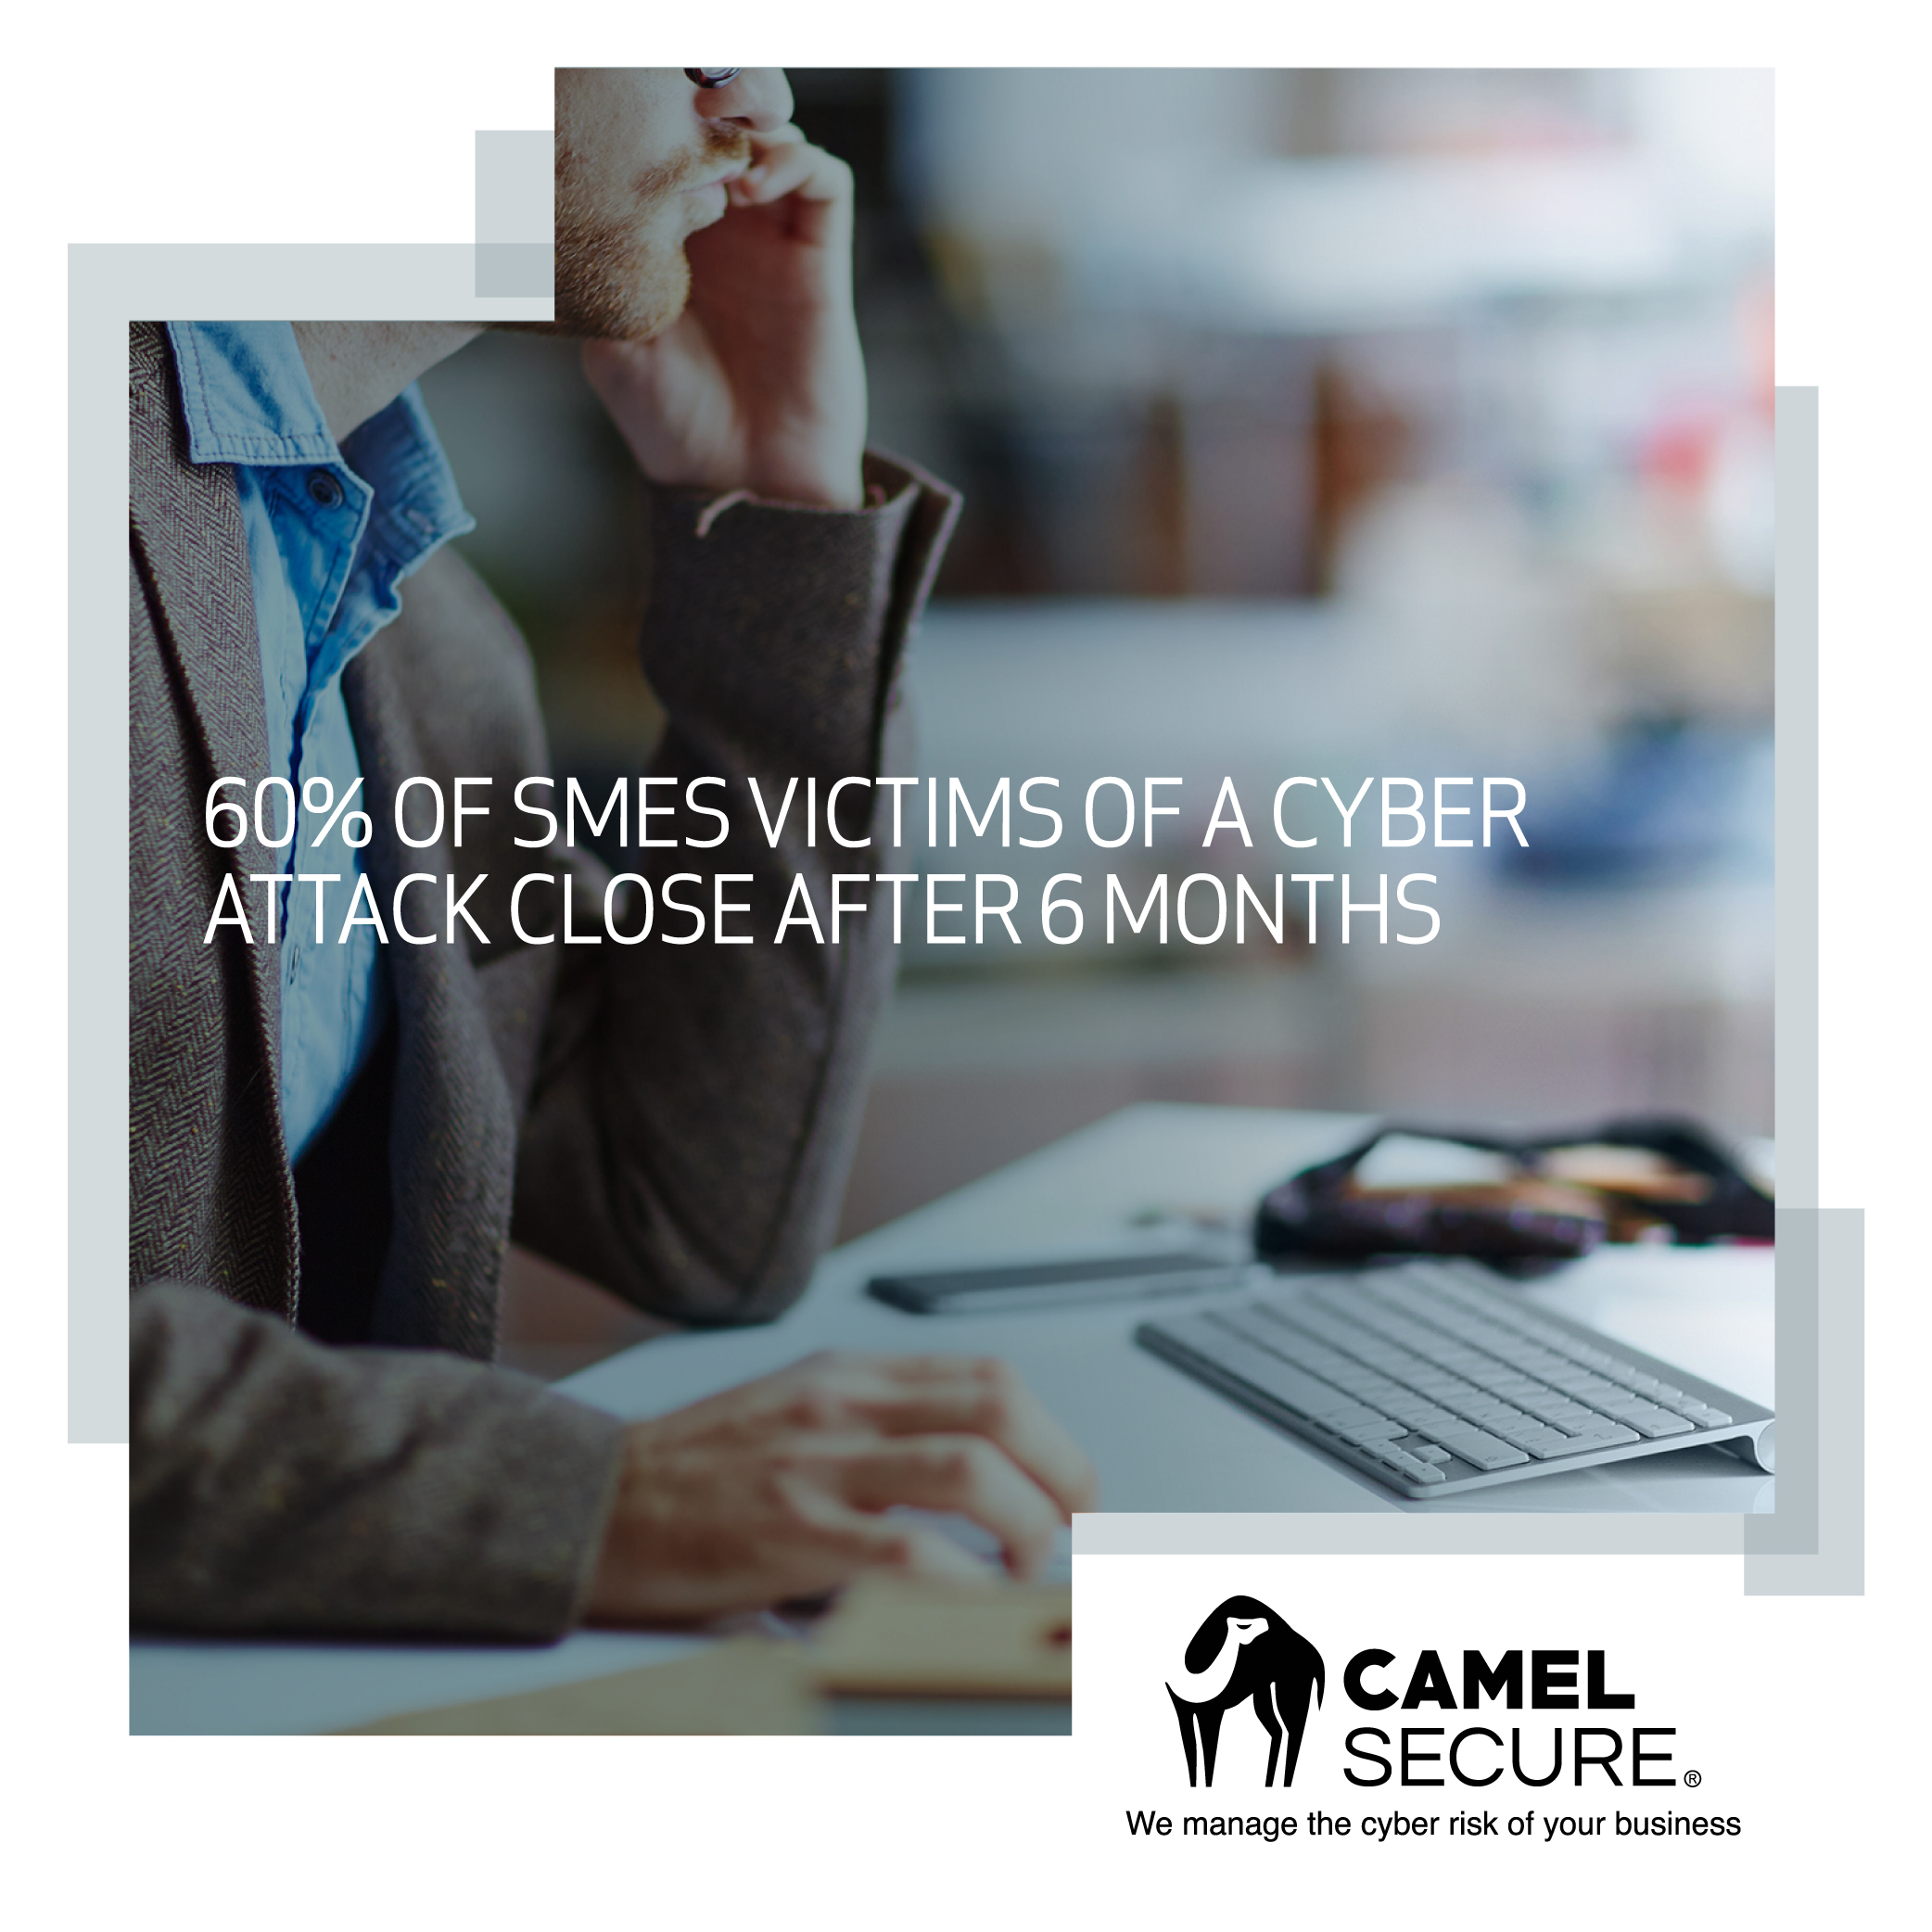 60% of SMEs victims of a cyber attack close after 6 months